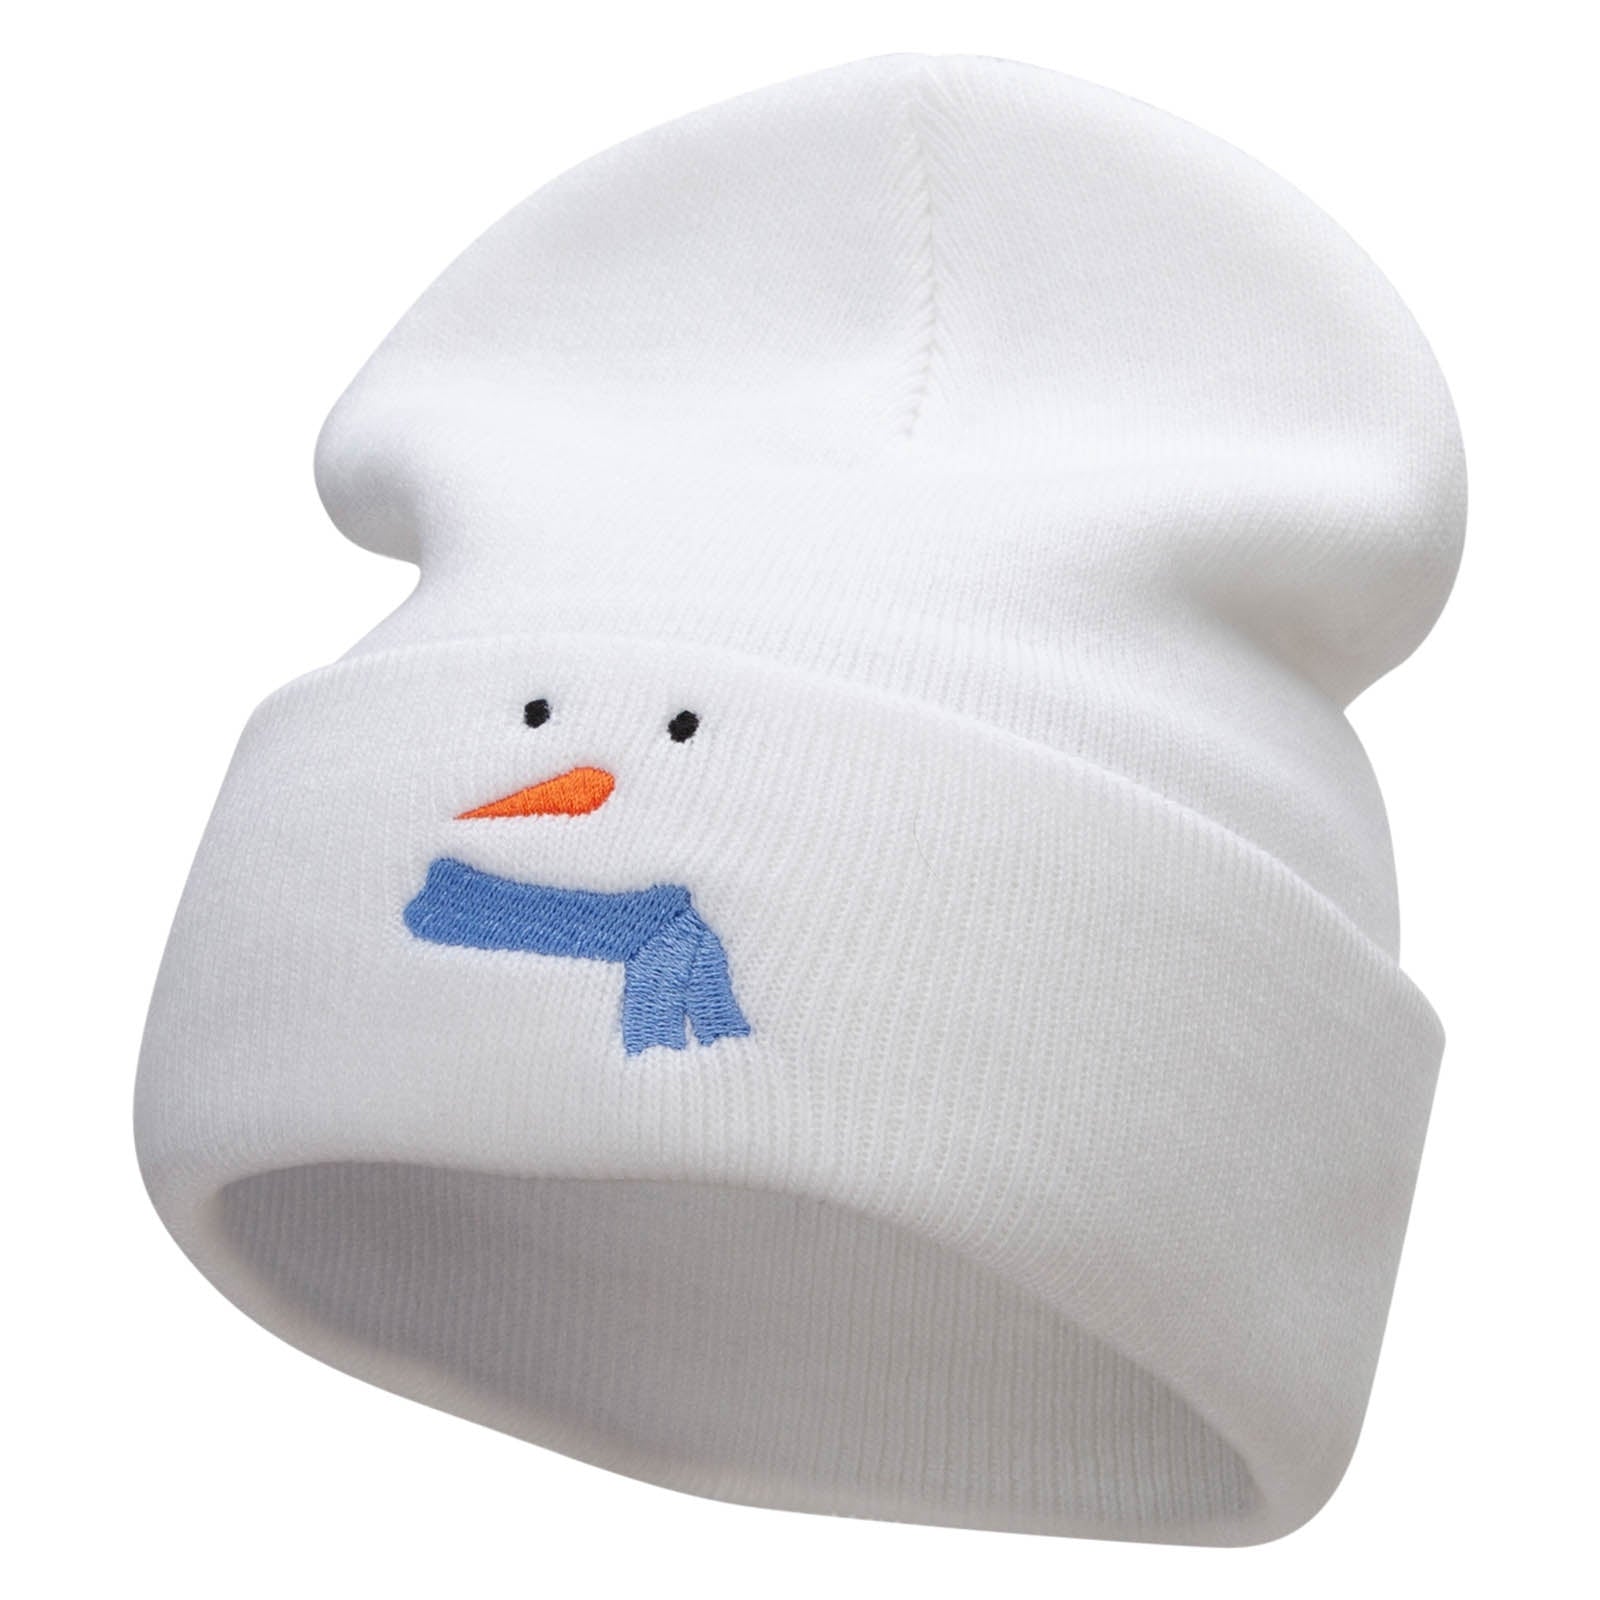 Minimal Snowman Embroidered 12 Inch Long Knitted Beanie - White OSFM